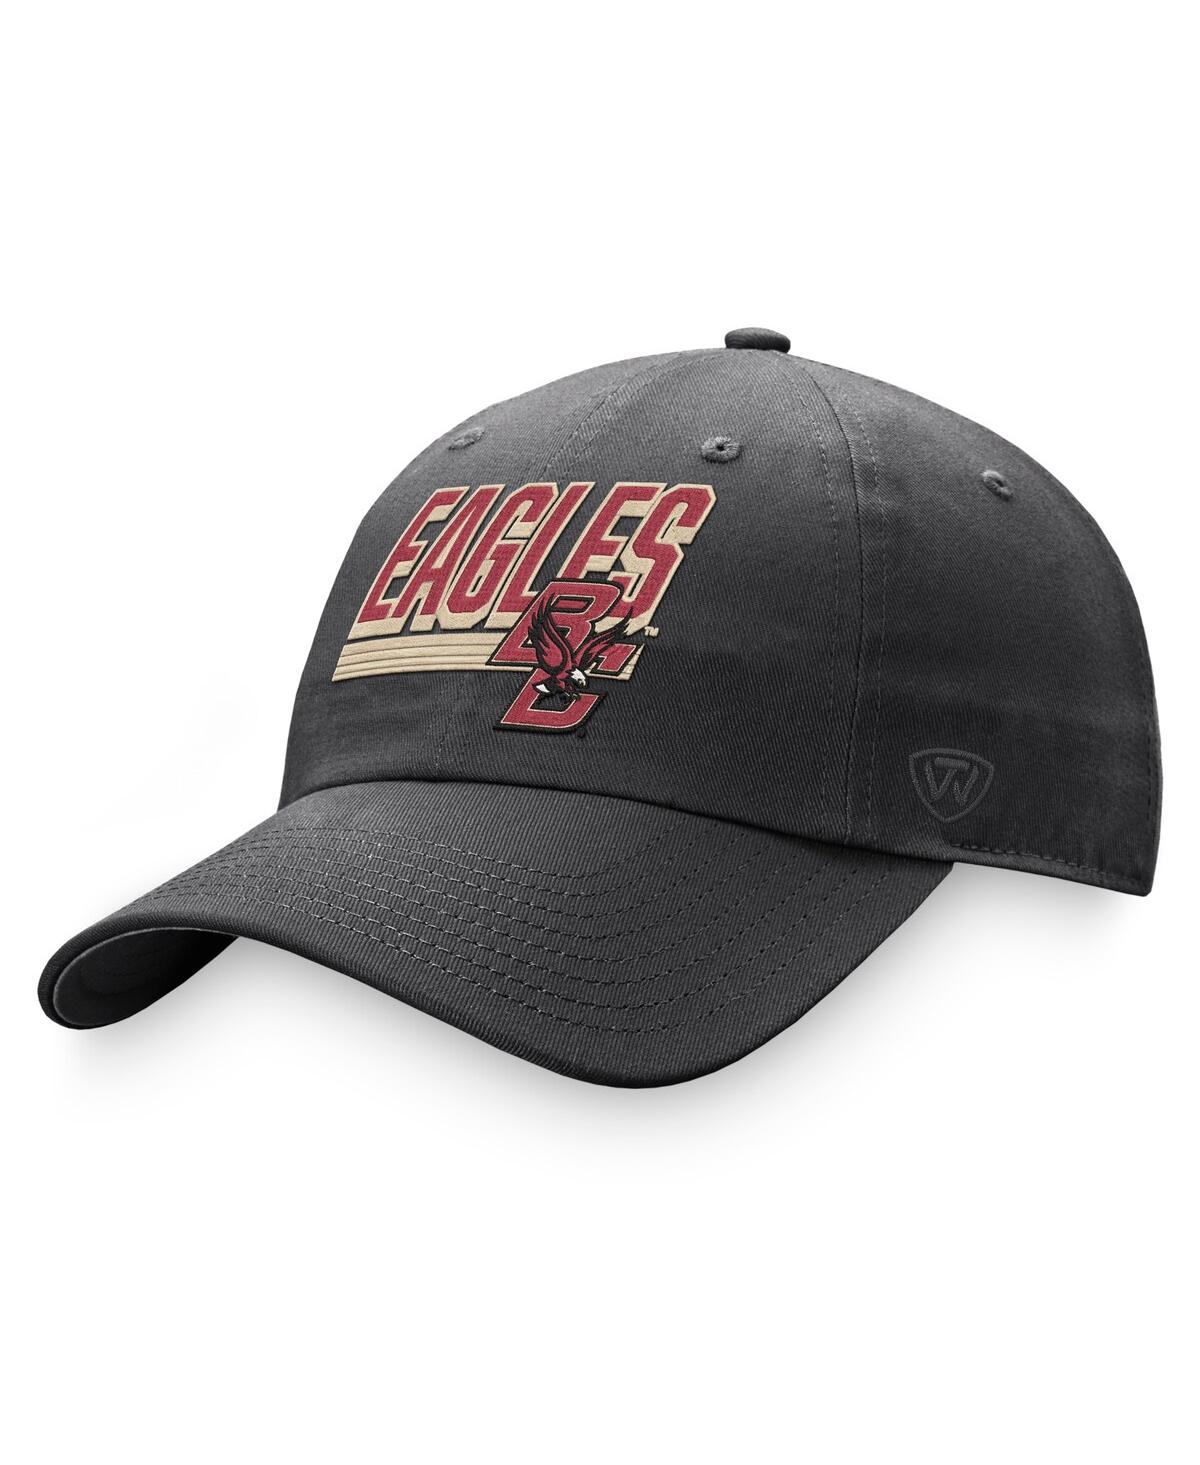 Men's Top of the World Charcoal Boston College Eagles Slice Adjustable Hat - Charcoal